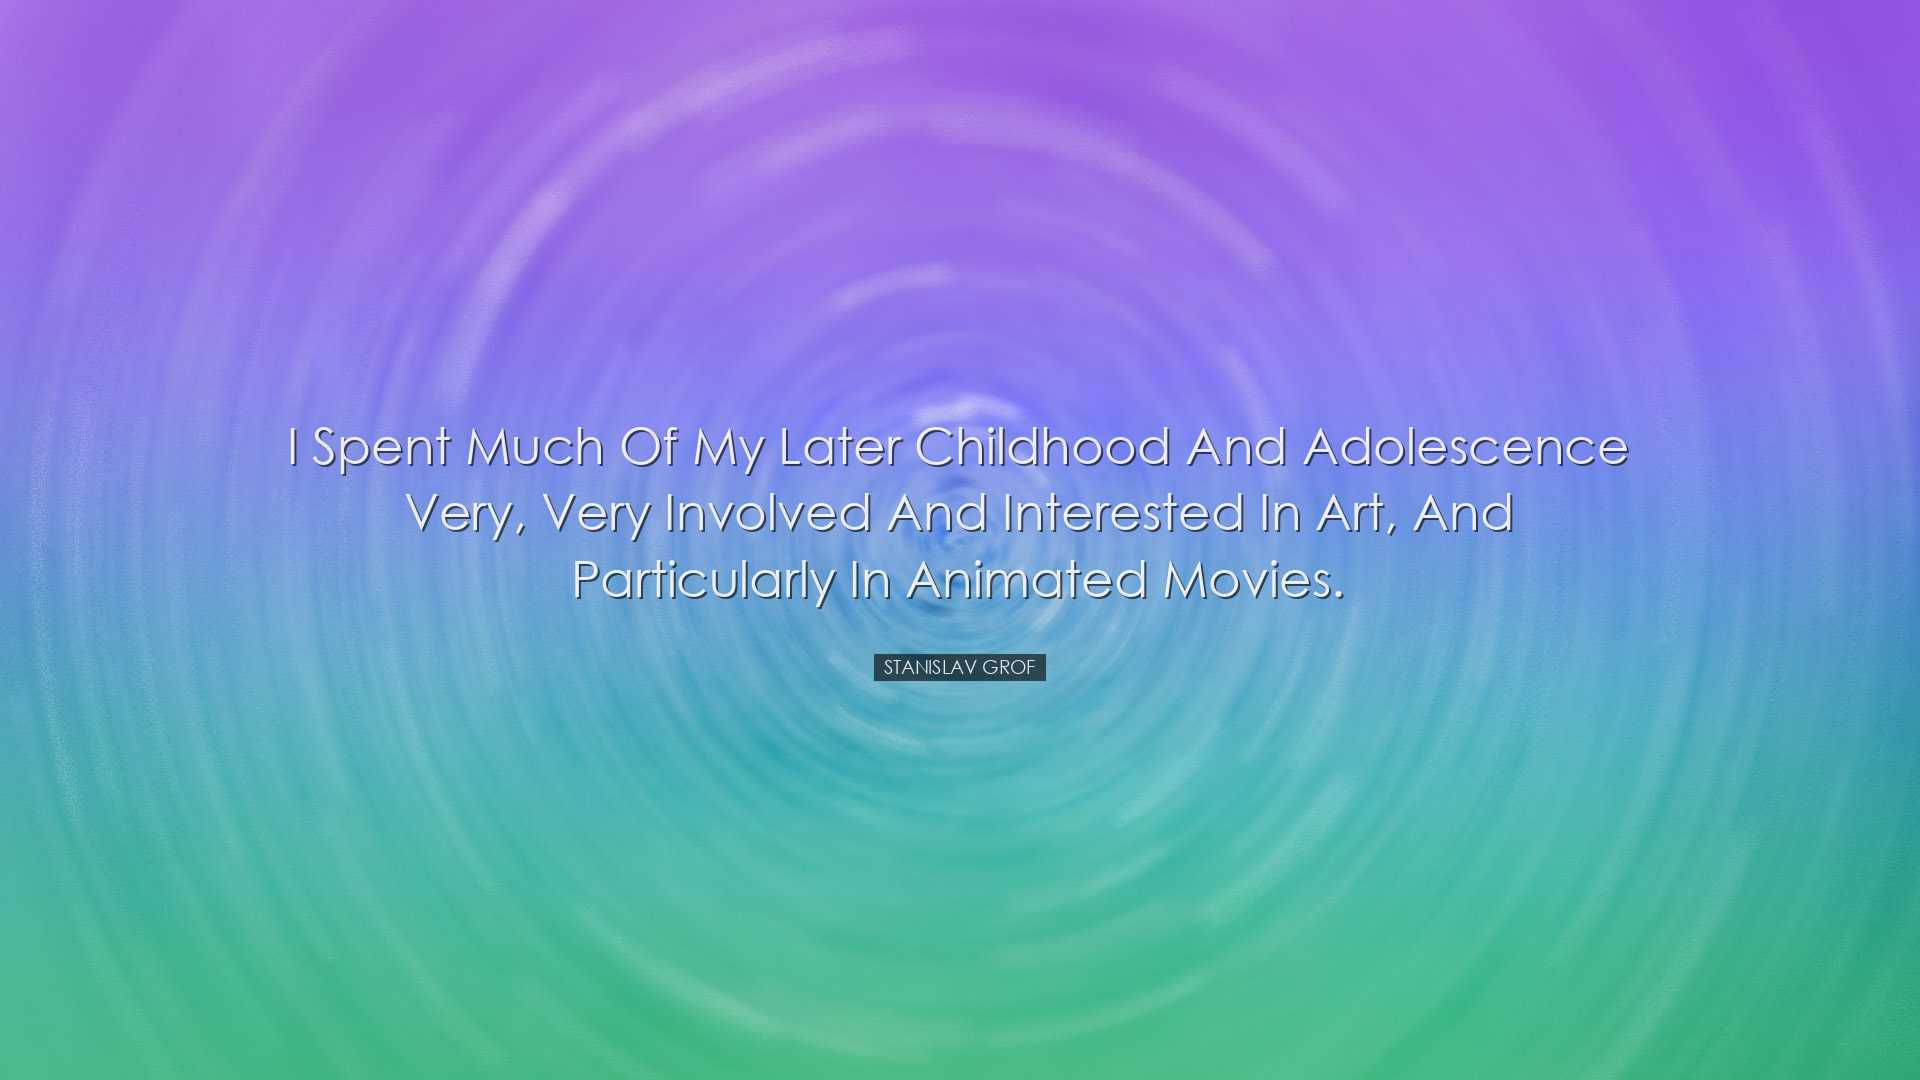 I spent much of my later childhood and adolescence very, very invo